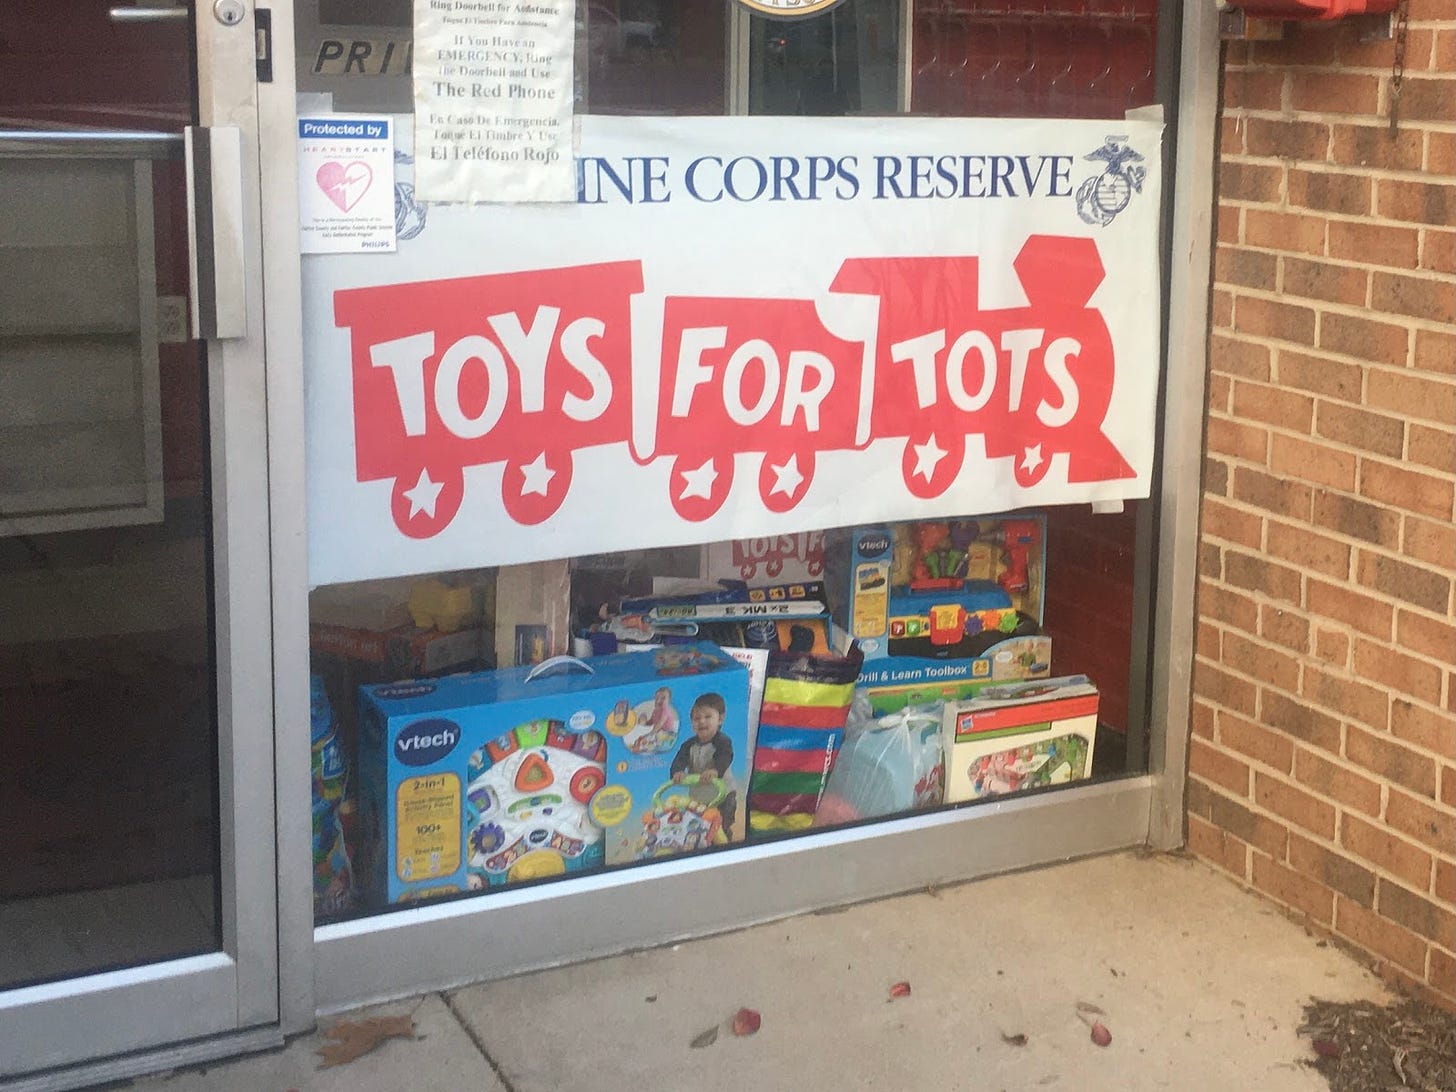 Toys for Tots sign in window with toys below